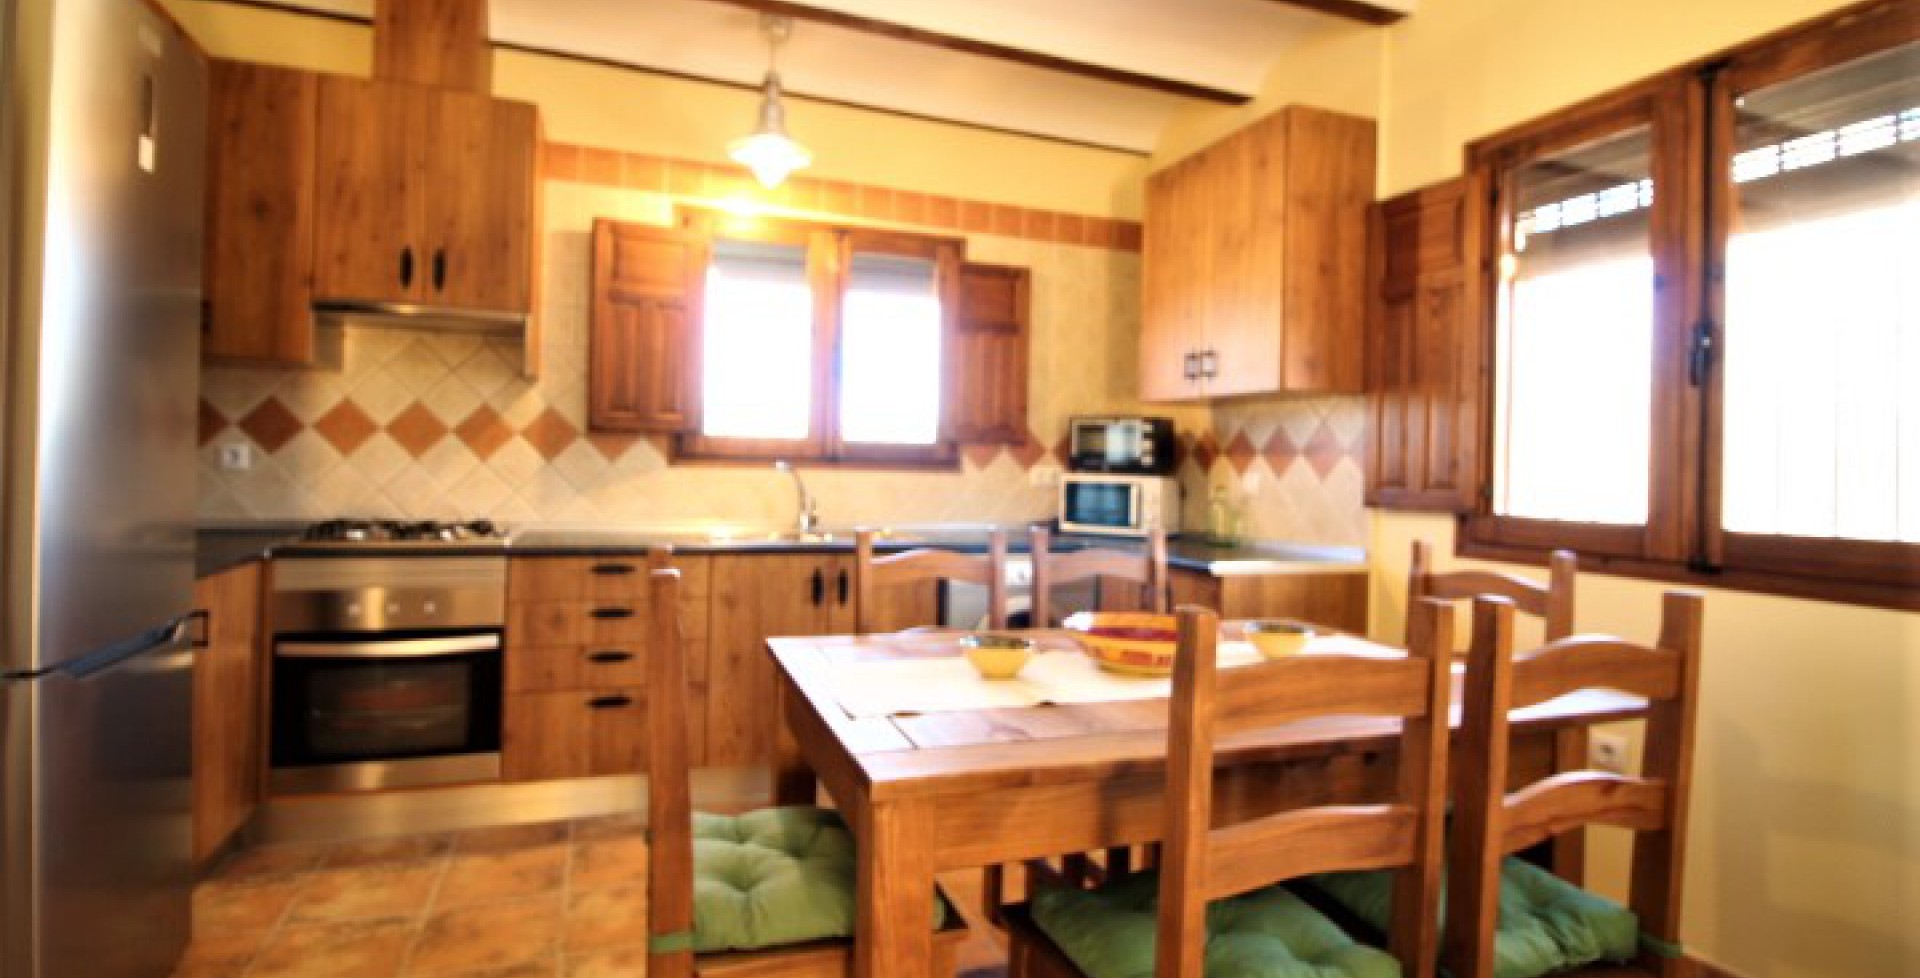 spectacular detached country house with nice kitchen